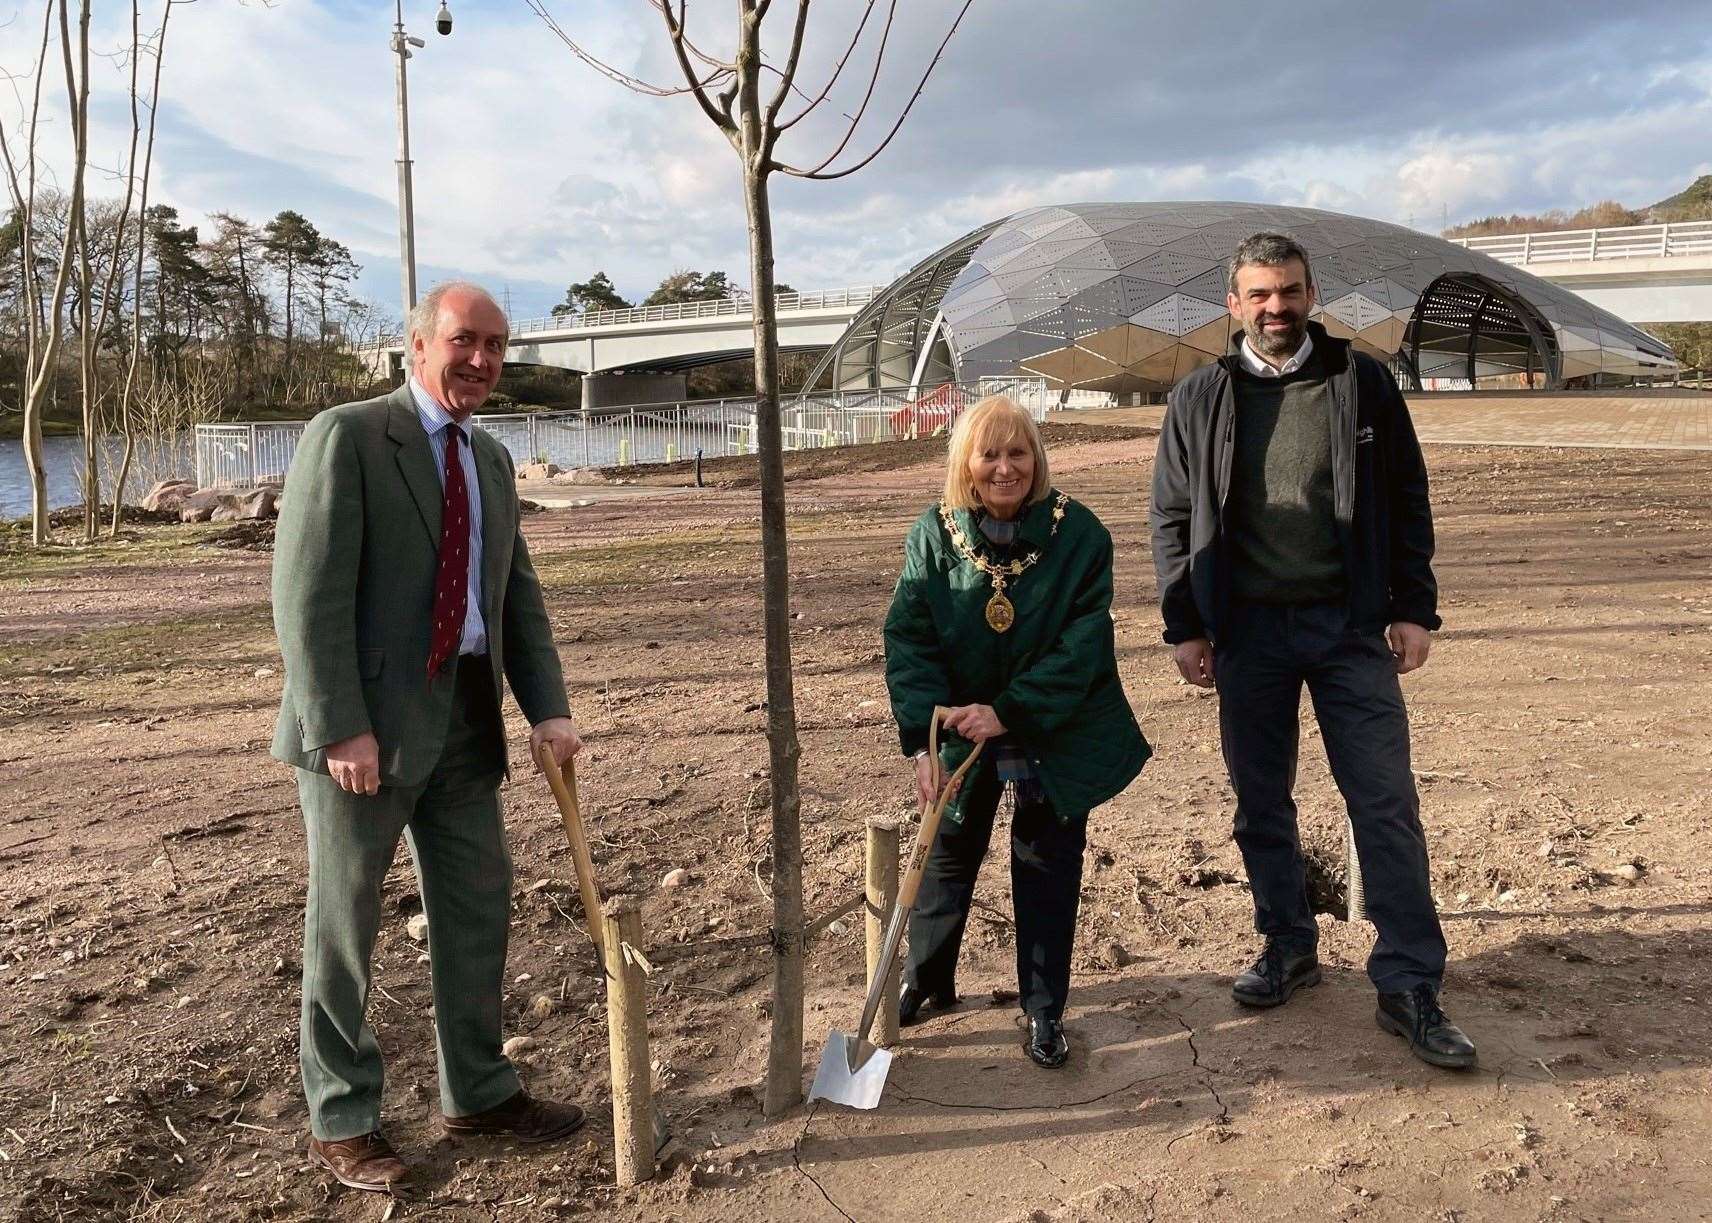 Lord-Lieutenant for Inverness James Wotherspoon, Provost and Leader of Inverness and Area Cllr Helen Carmichael and Inverness Botanic Gardens manager Ewan MacKintosh planting at the hydro scheme in Inverness.